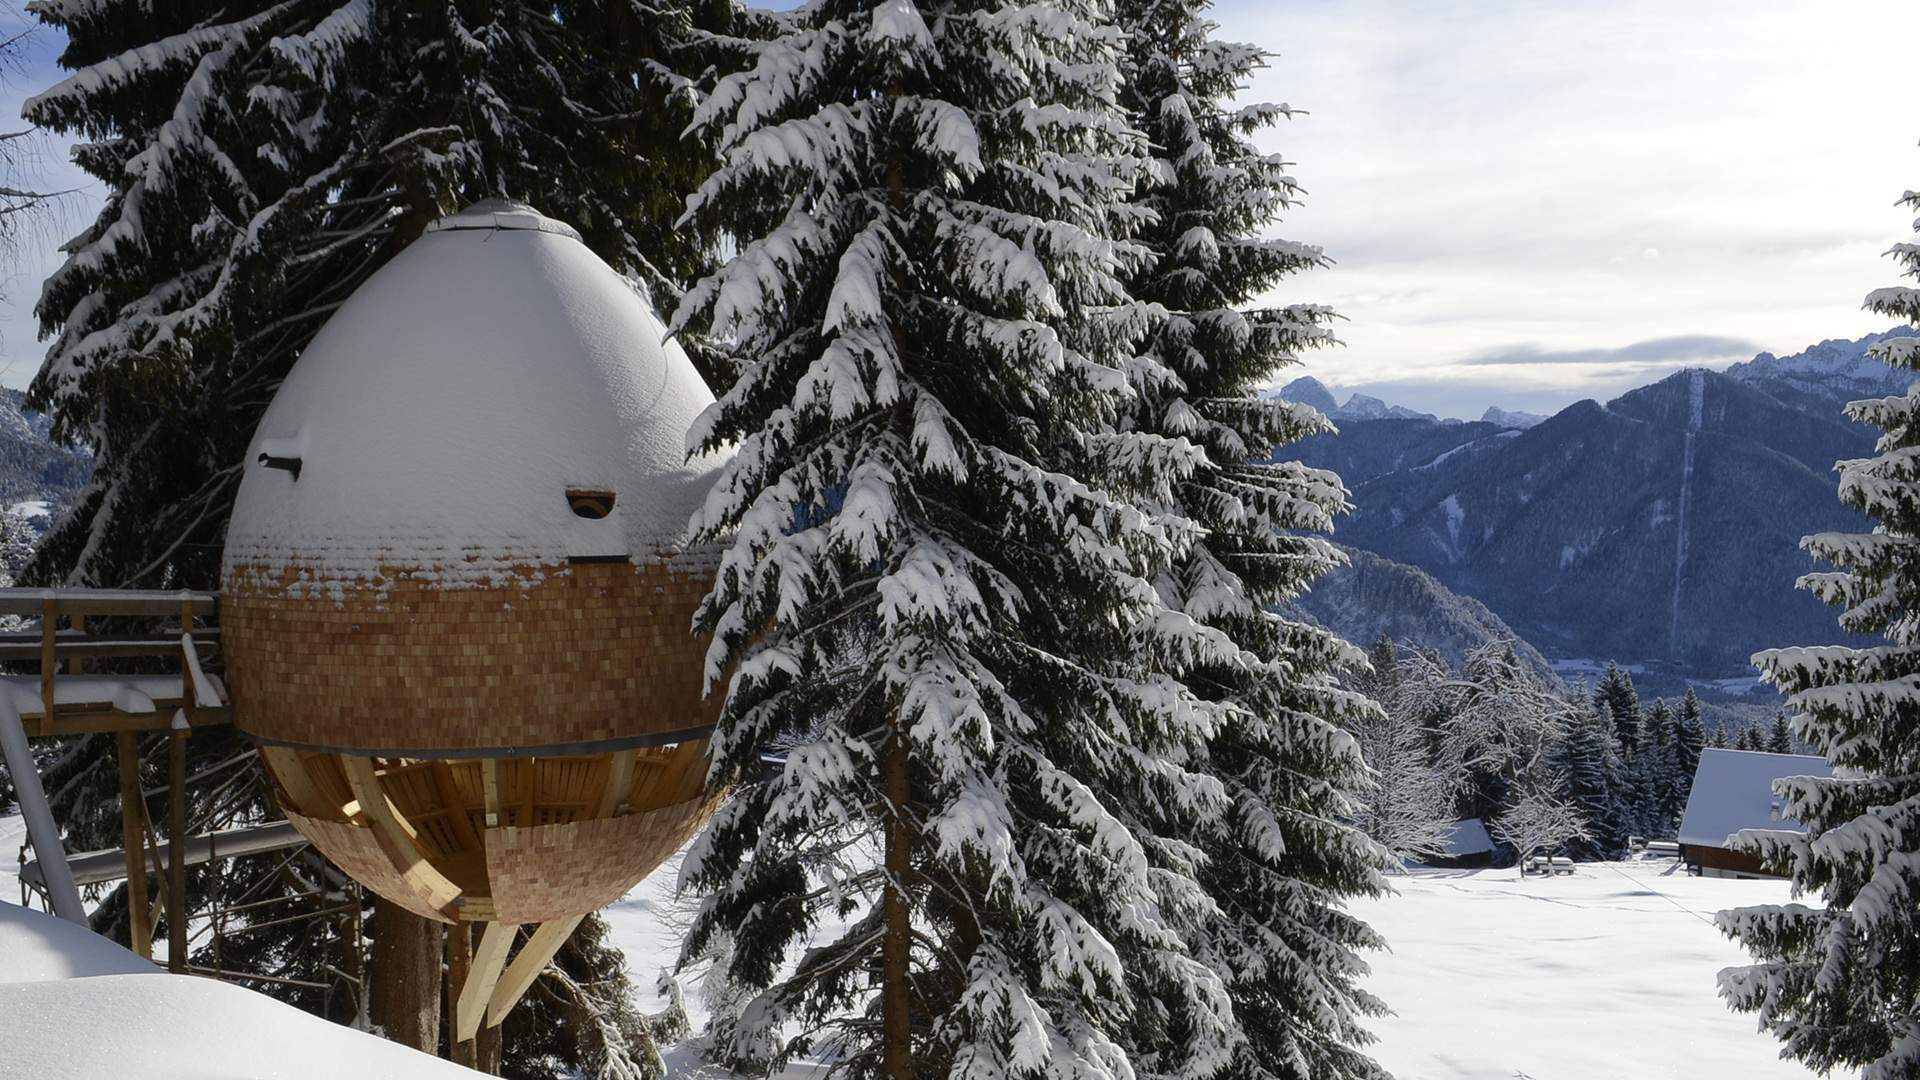 This Pinecone-Shaped Italian Holiday Home Is the Ultimate Treehouse With a View